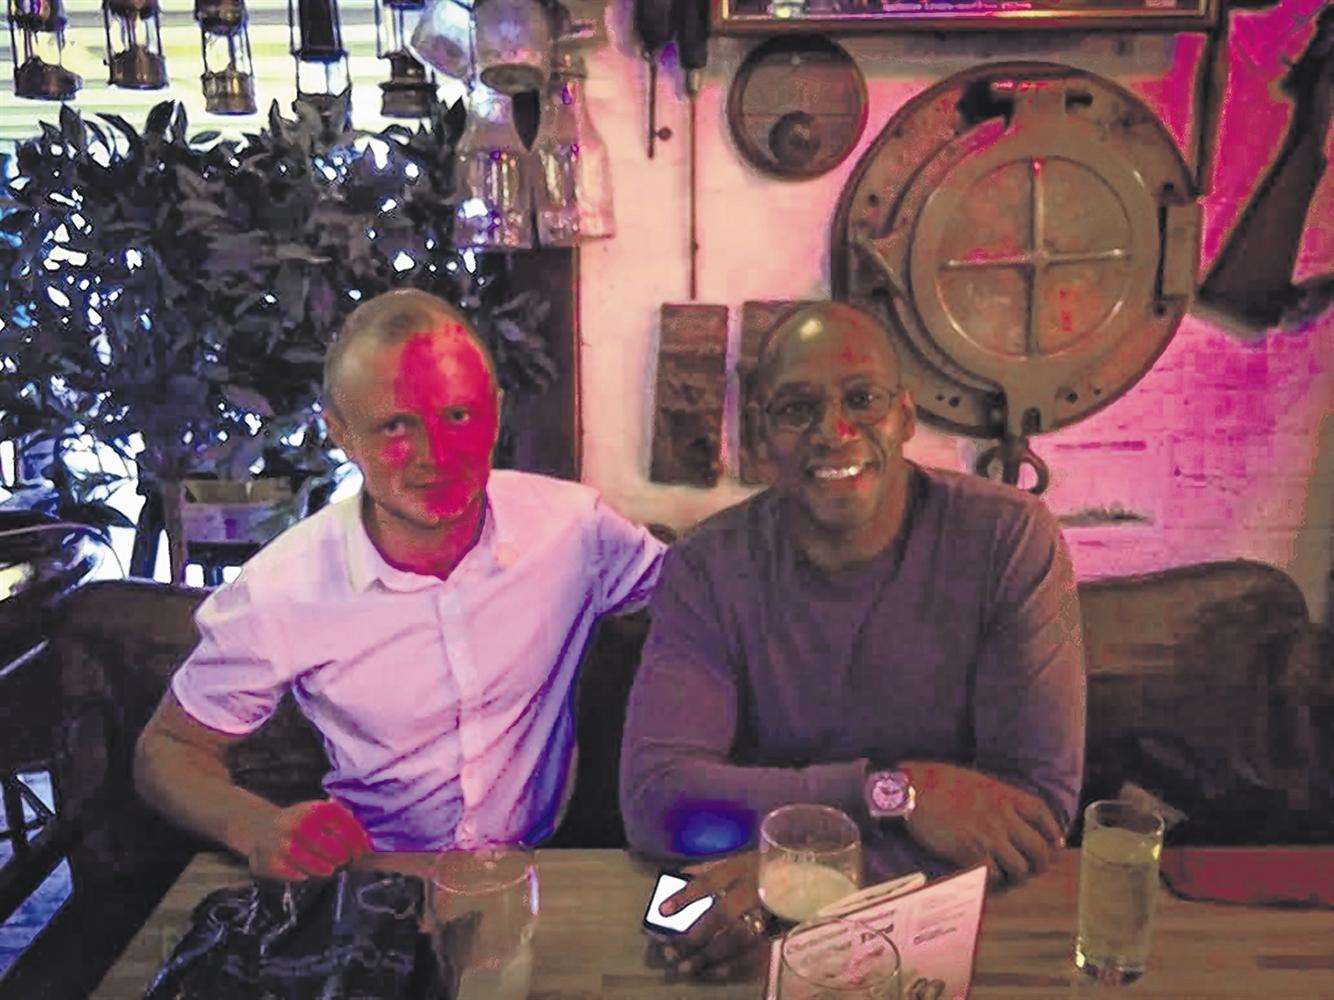 Ian Wright met with staff and manager, Richard Gleeson, of Cullins Yard restaurant in Dover.